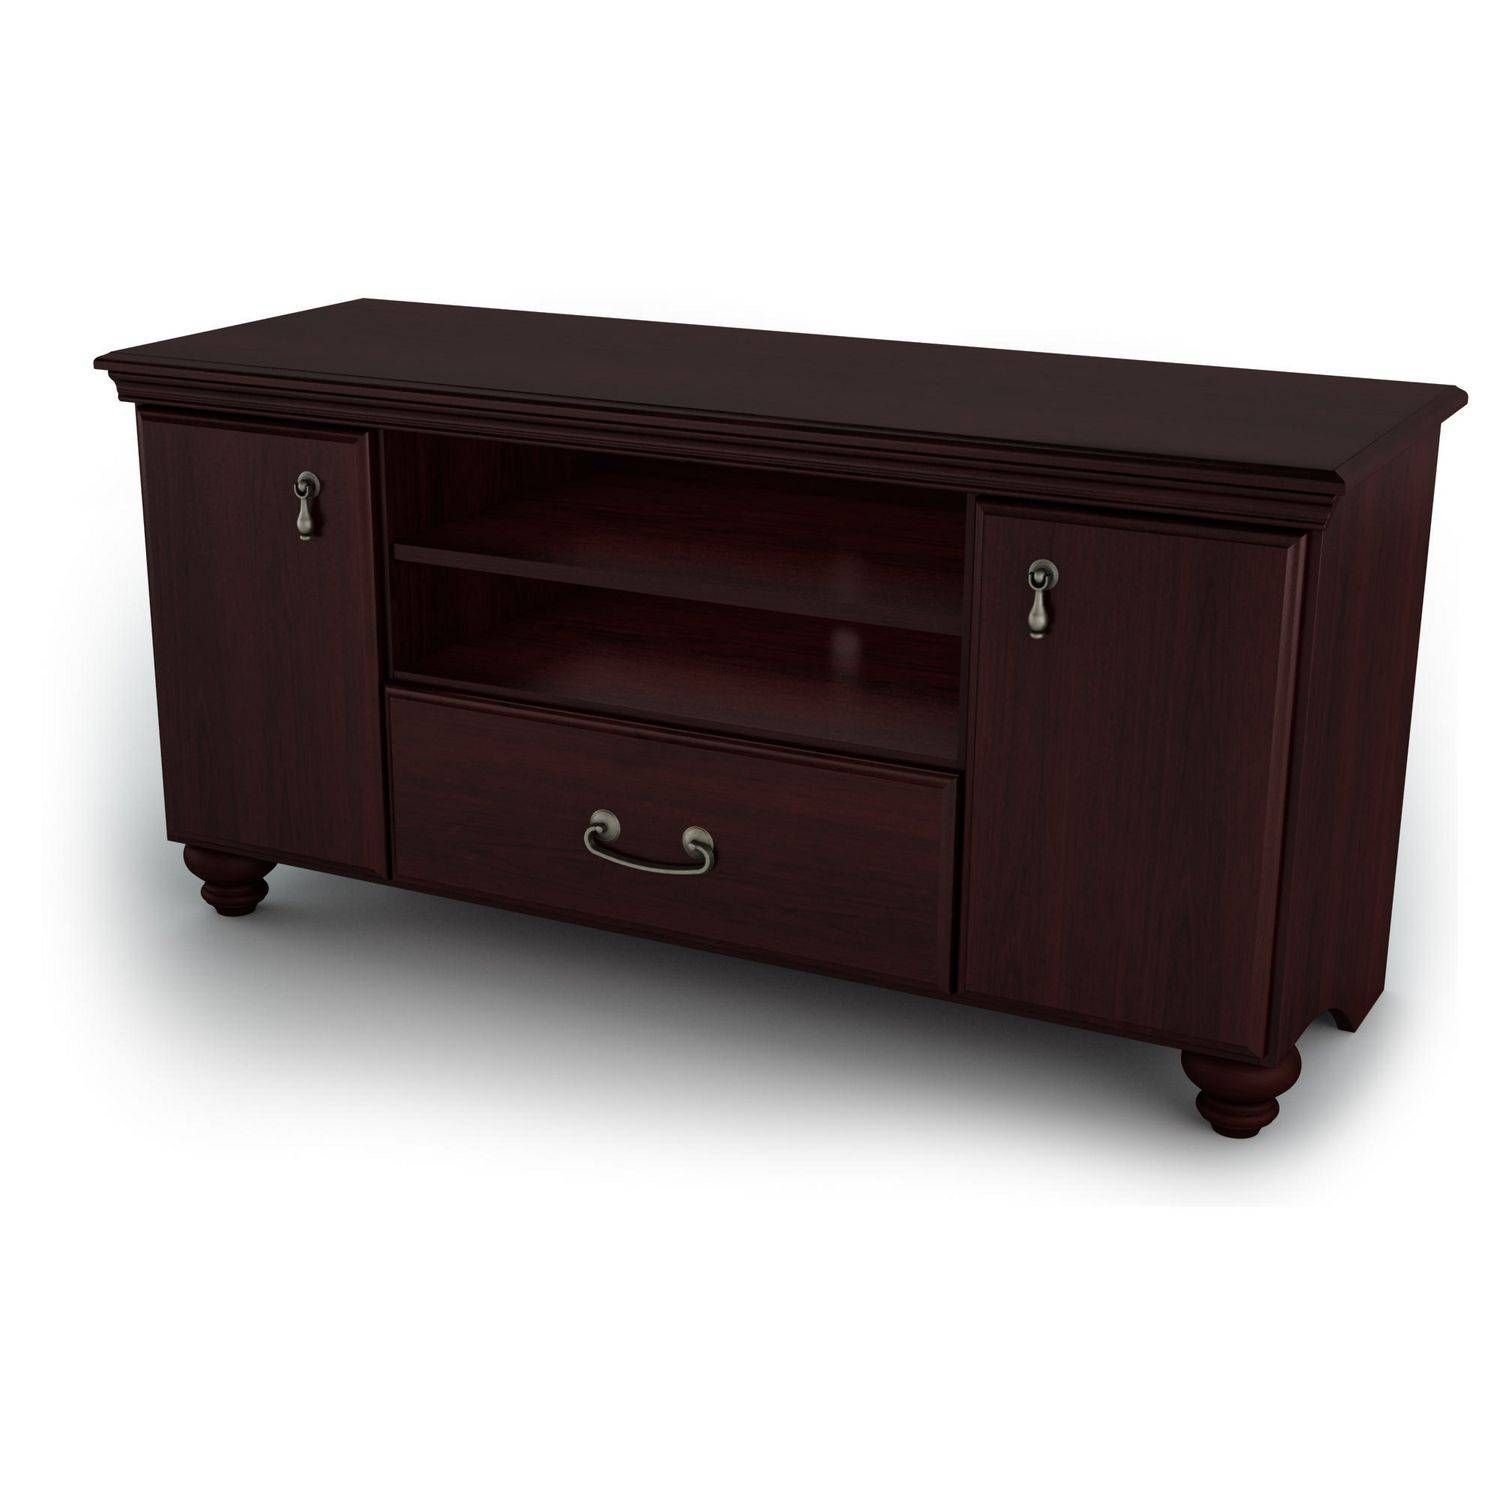 South Shore Noble Dark Mahogany Tv Stand/storage Unit | Walmart Canada Intended For Mahogany Tv Stands (View 15 of 15)